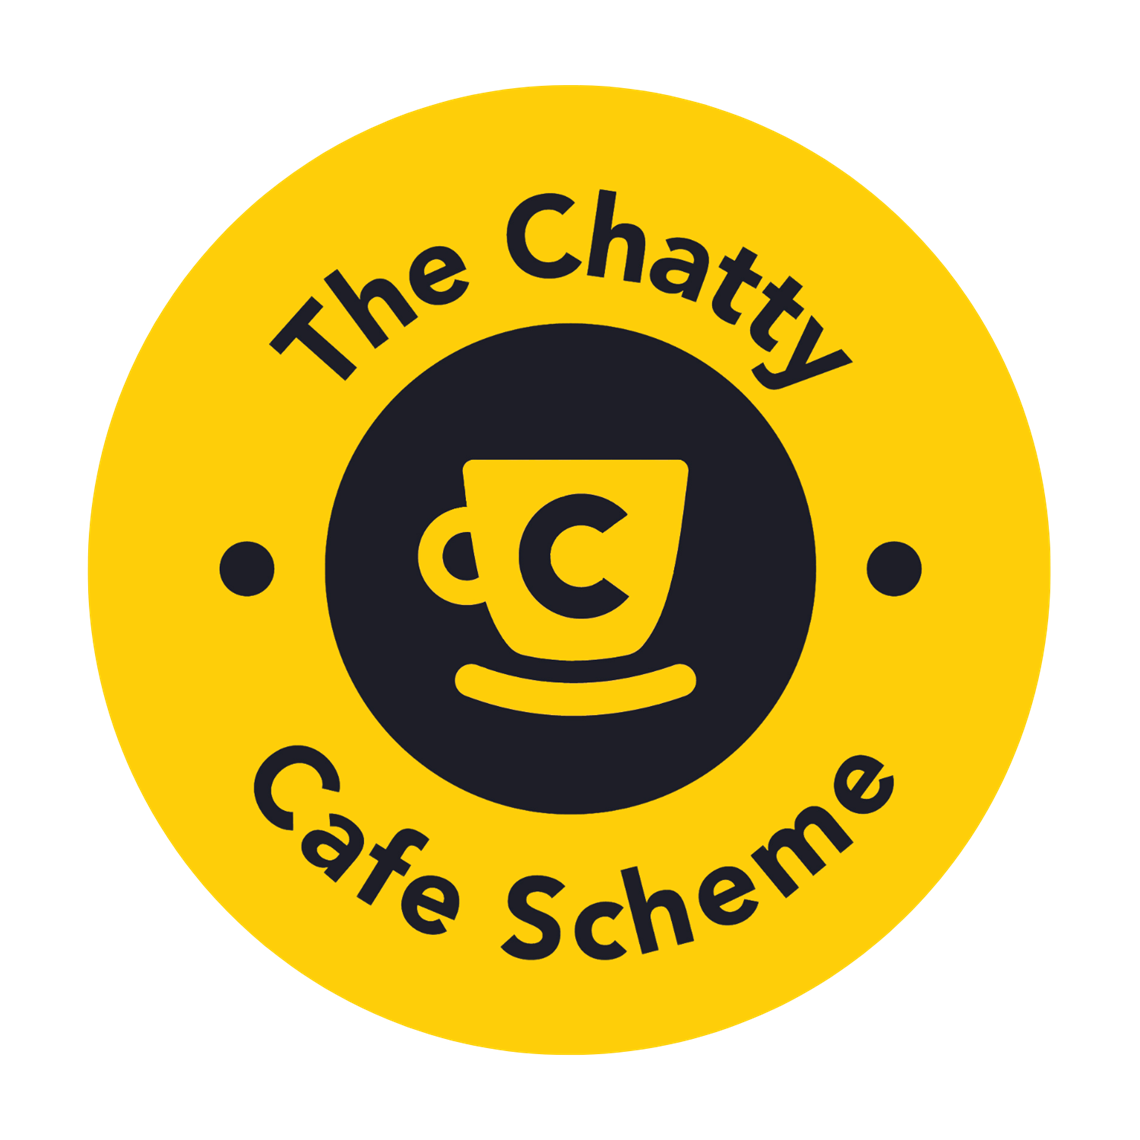 Chatty Cafe logo in yellow circle.png